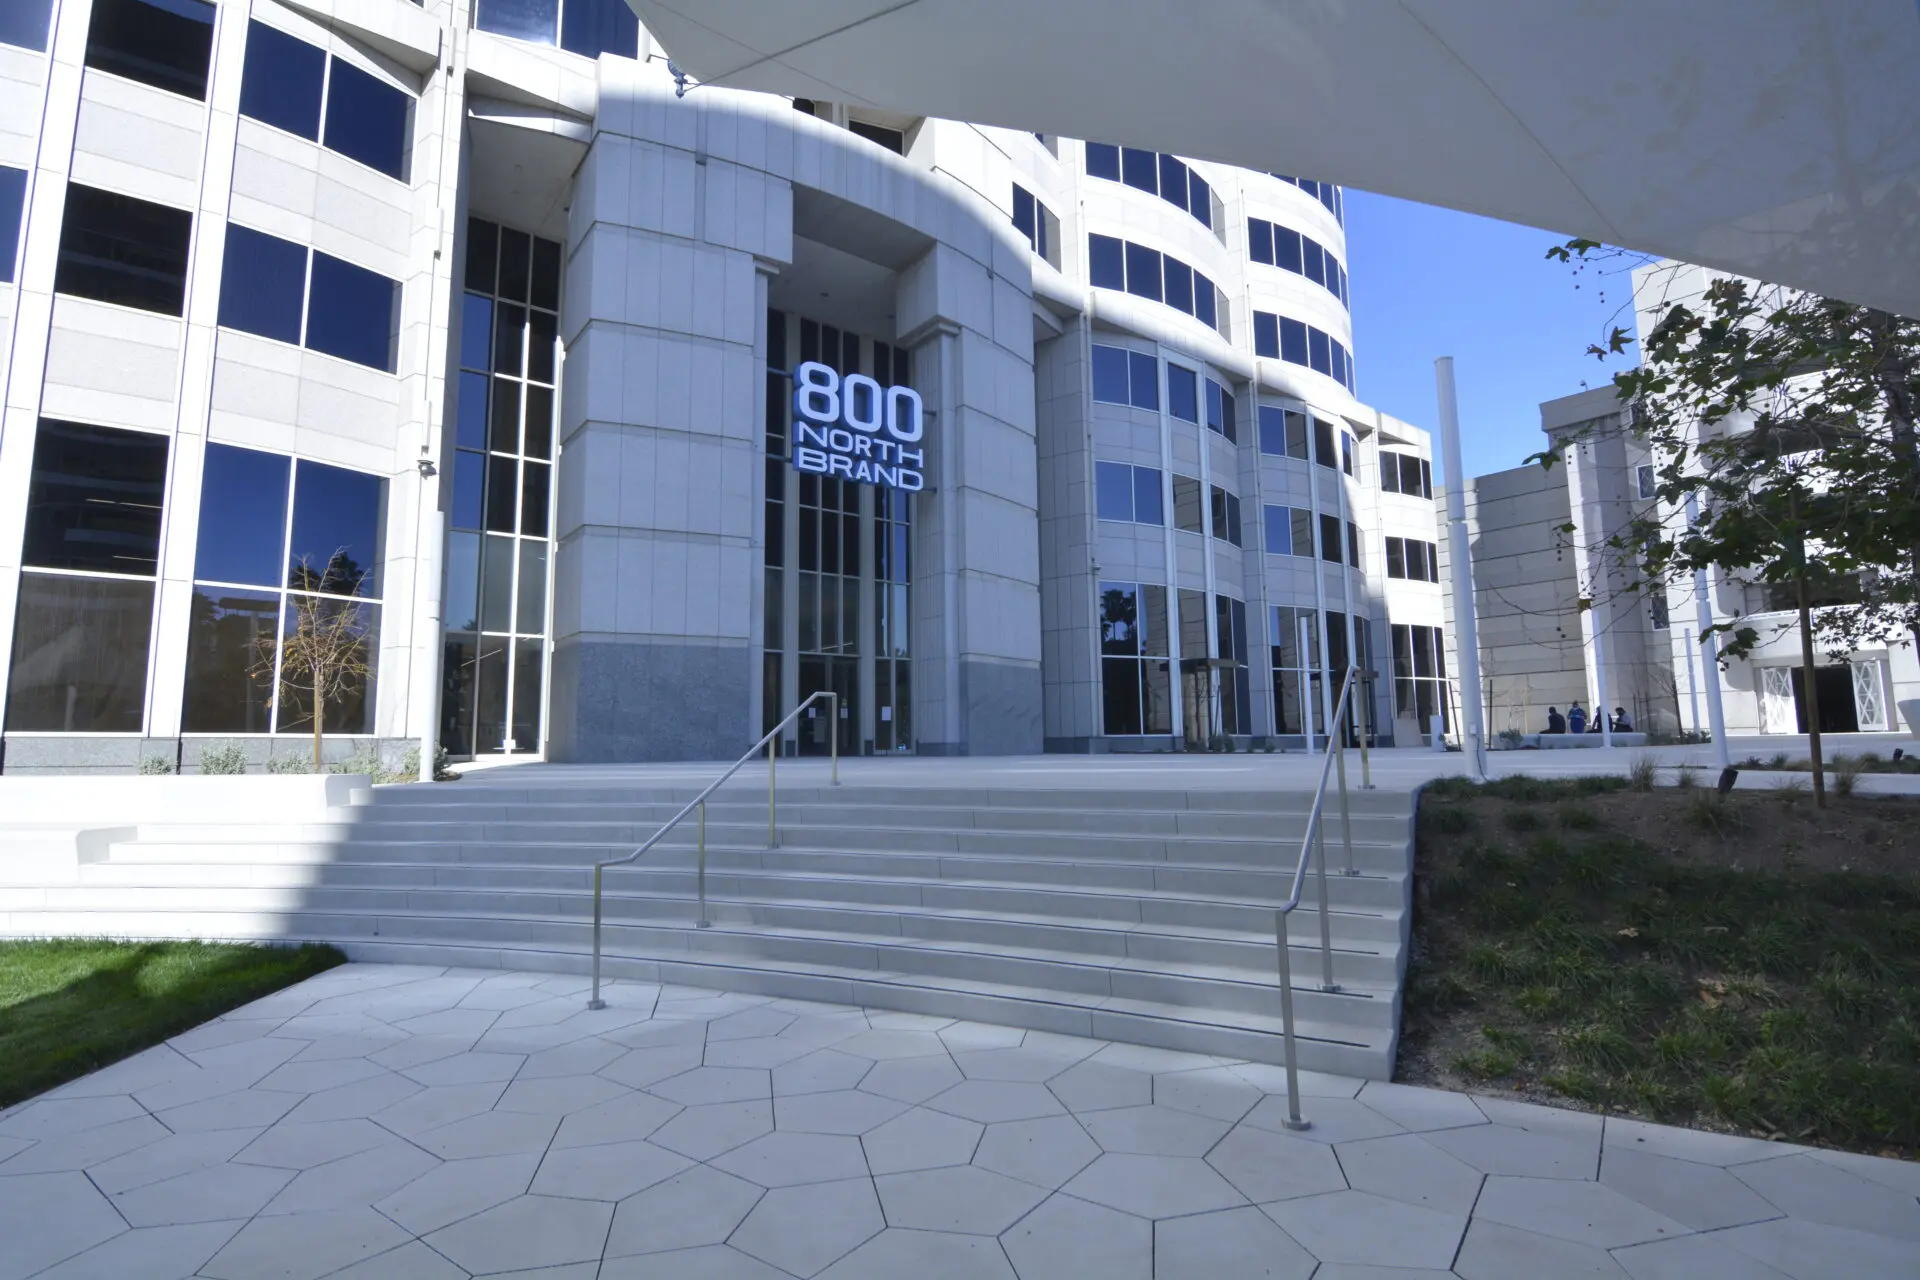 The entrance to the 800 North Brand building